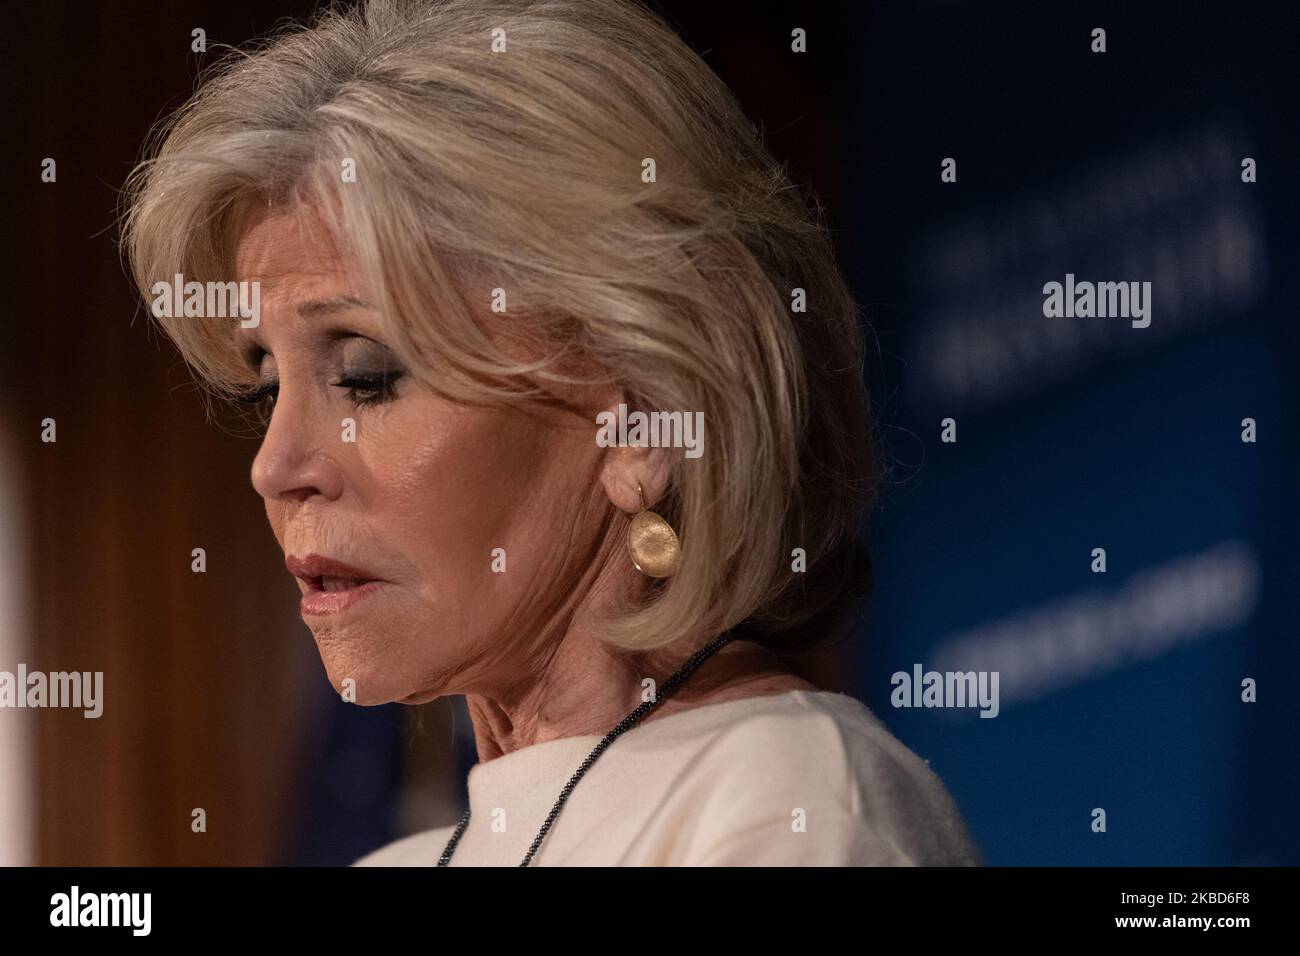 Actor and activist Jane Fonda speaks to attendees at the National Press Club Headliners Luncheon in Washington, D.C., on Tuesday, December 17, 2019. (Photo by Cheriss May/NurPhoto) Stock Photo